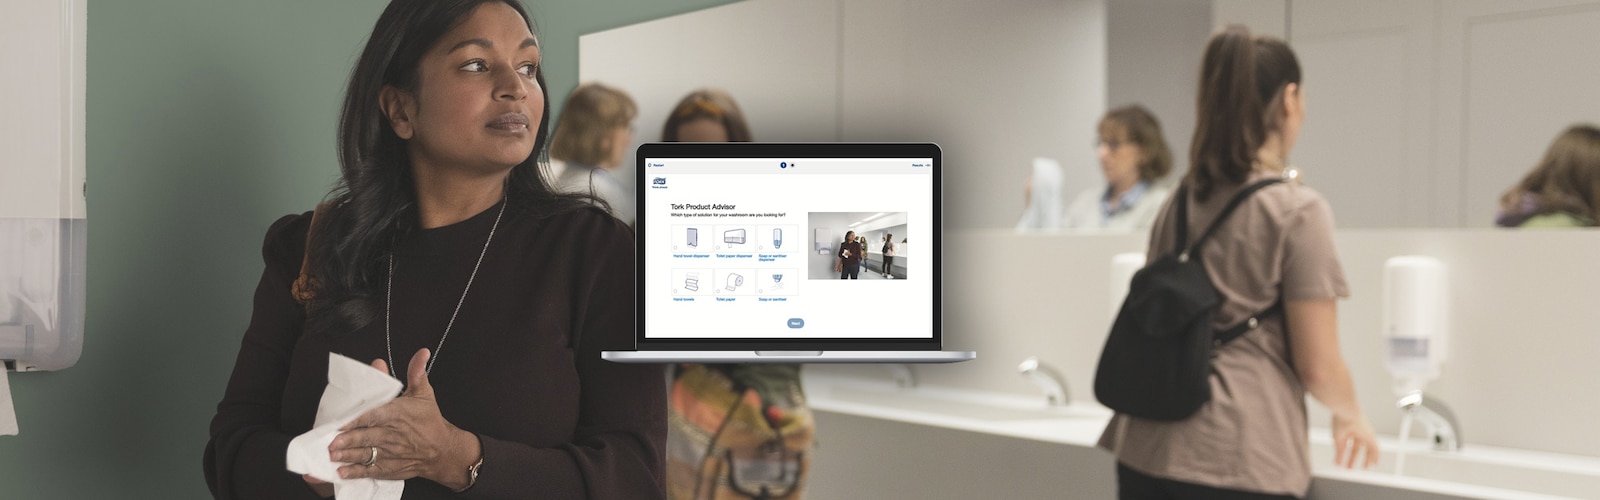 Women in a public restroom washing and drying their hands, in front a laptop showing Tork Product Advisor Tool